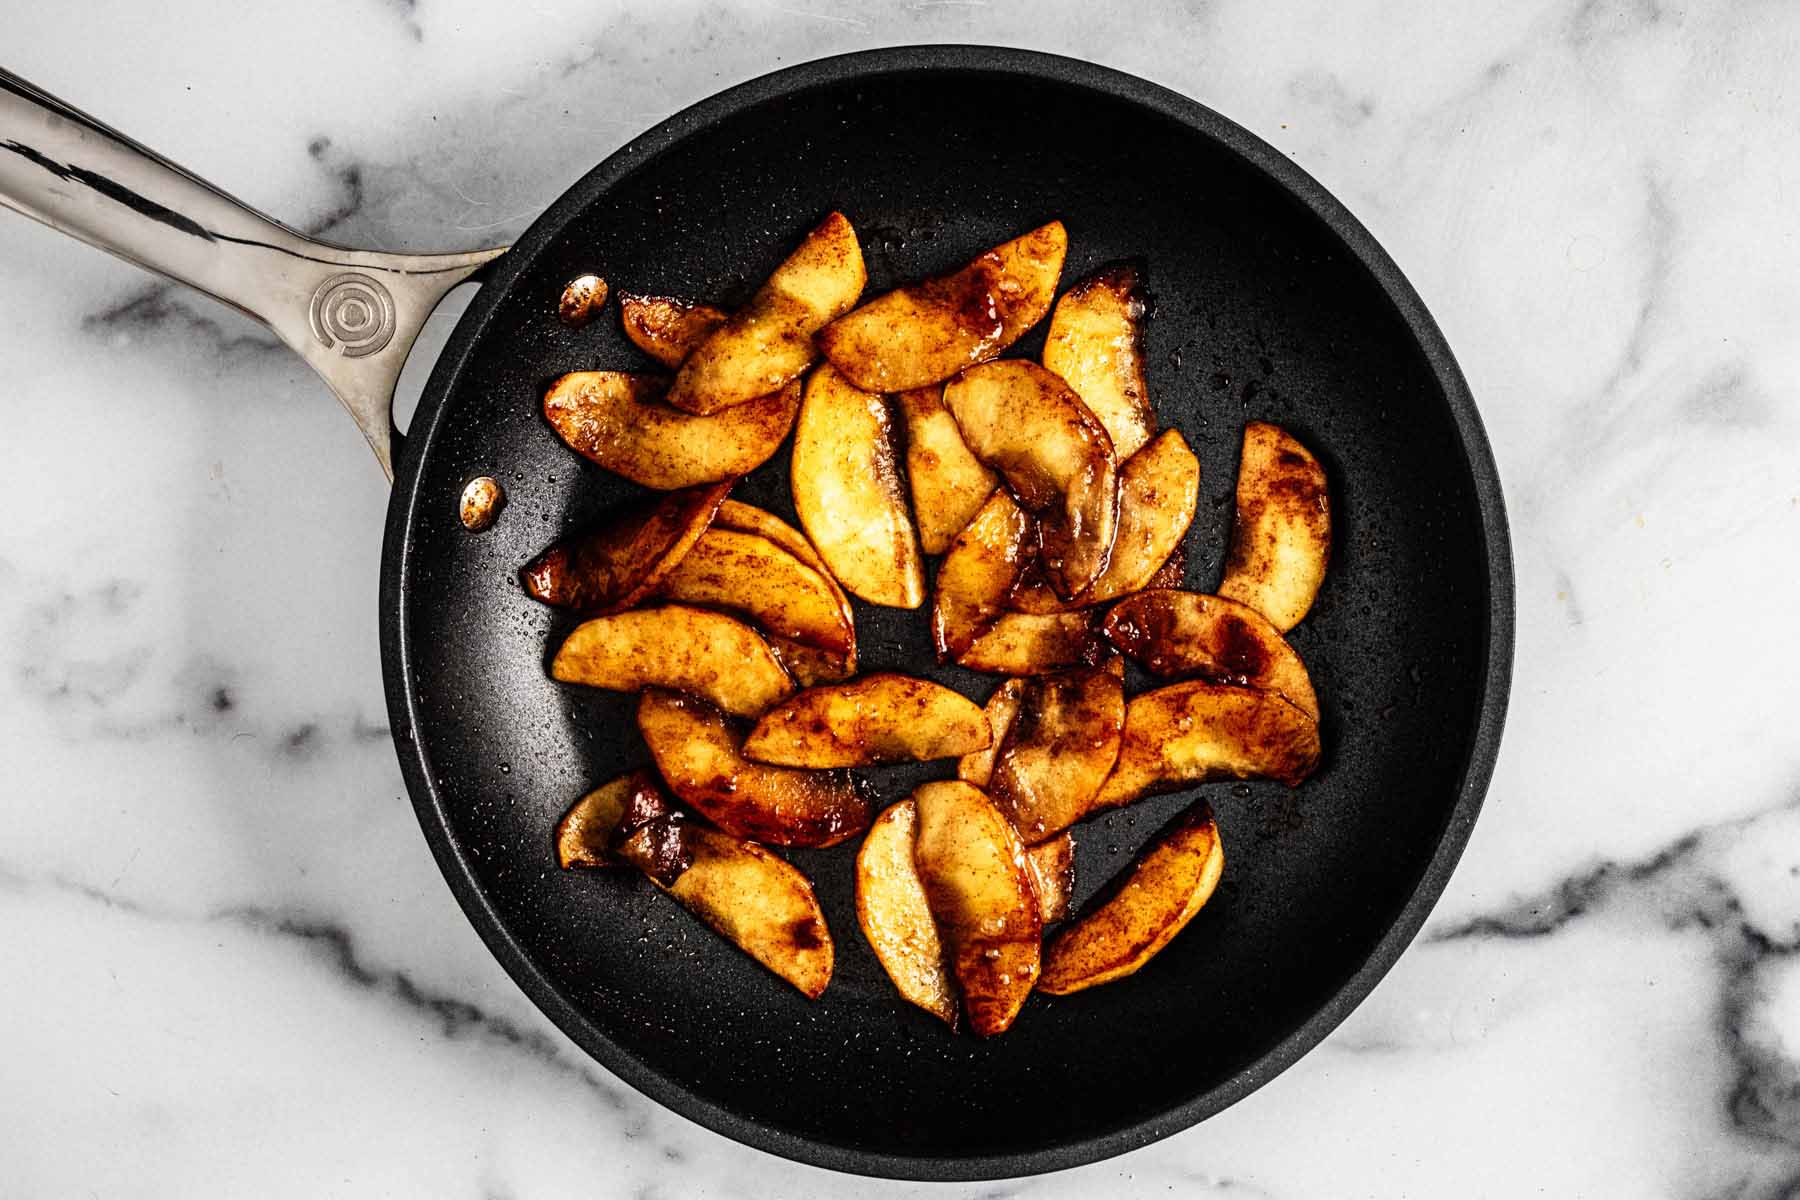 Caramelized apples in a small skillet.